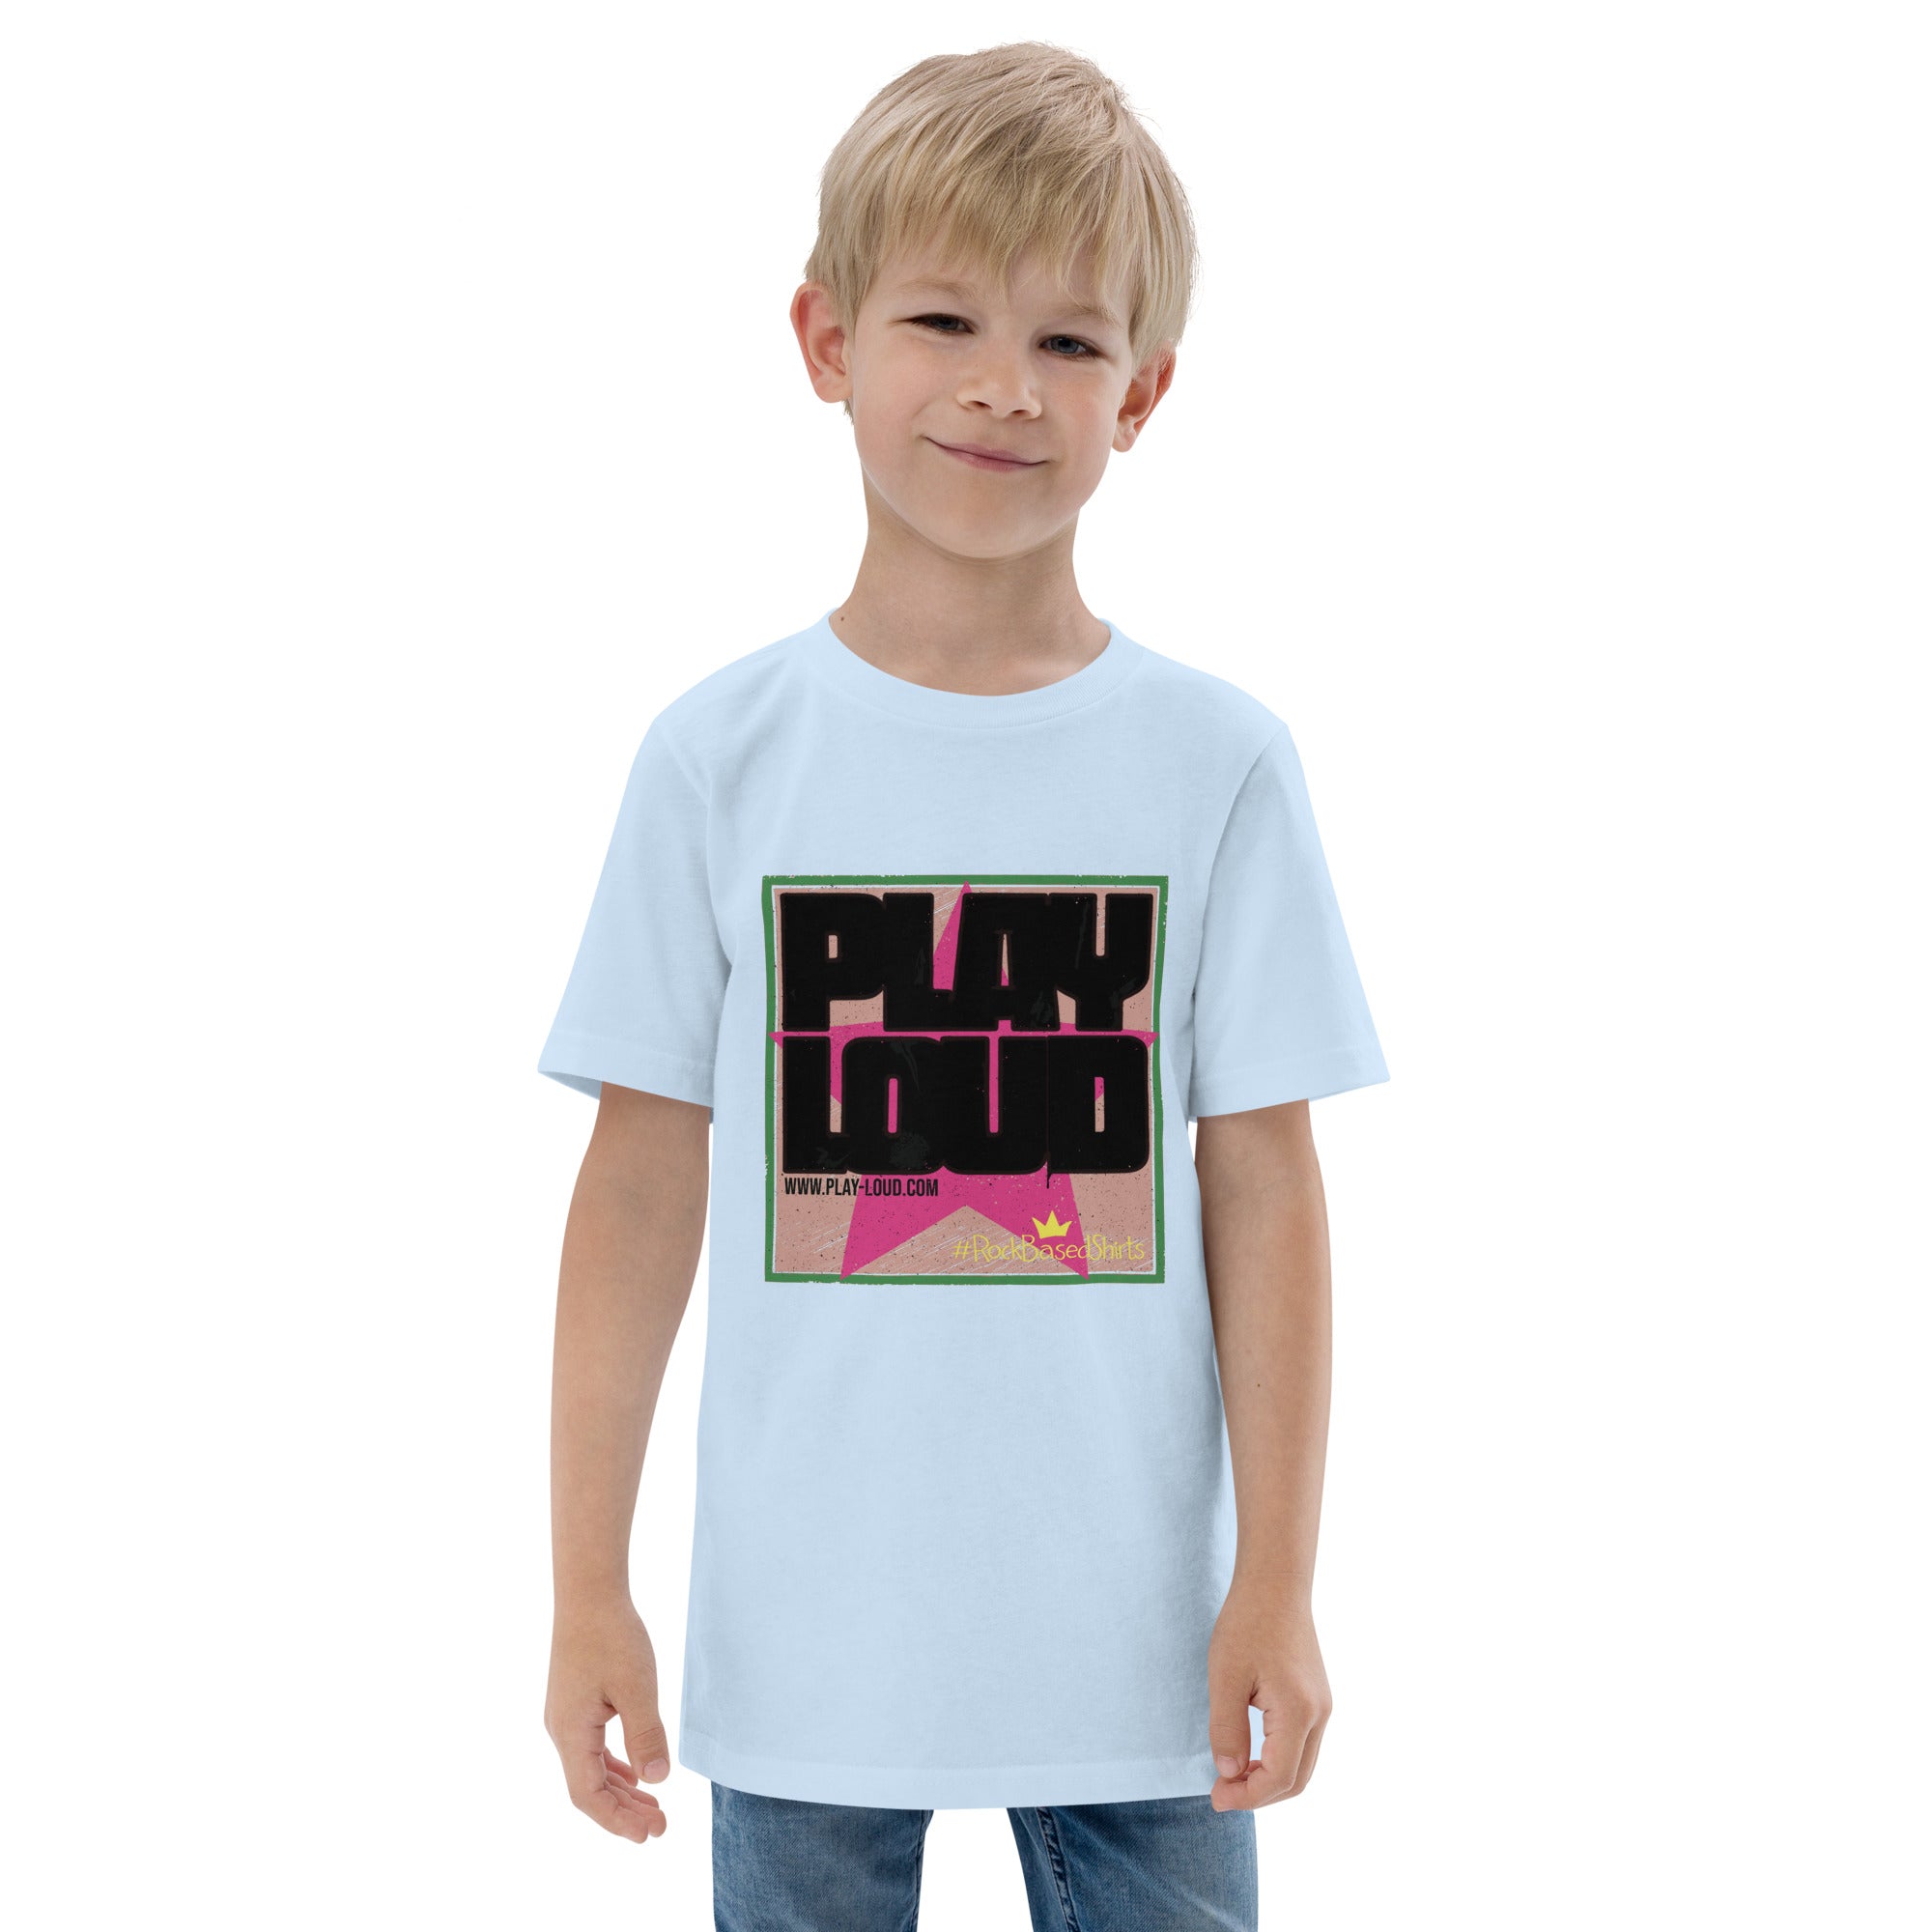 Play Loud youth cotton t-shirt